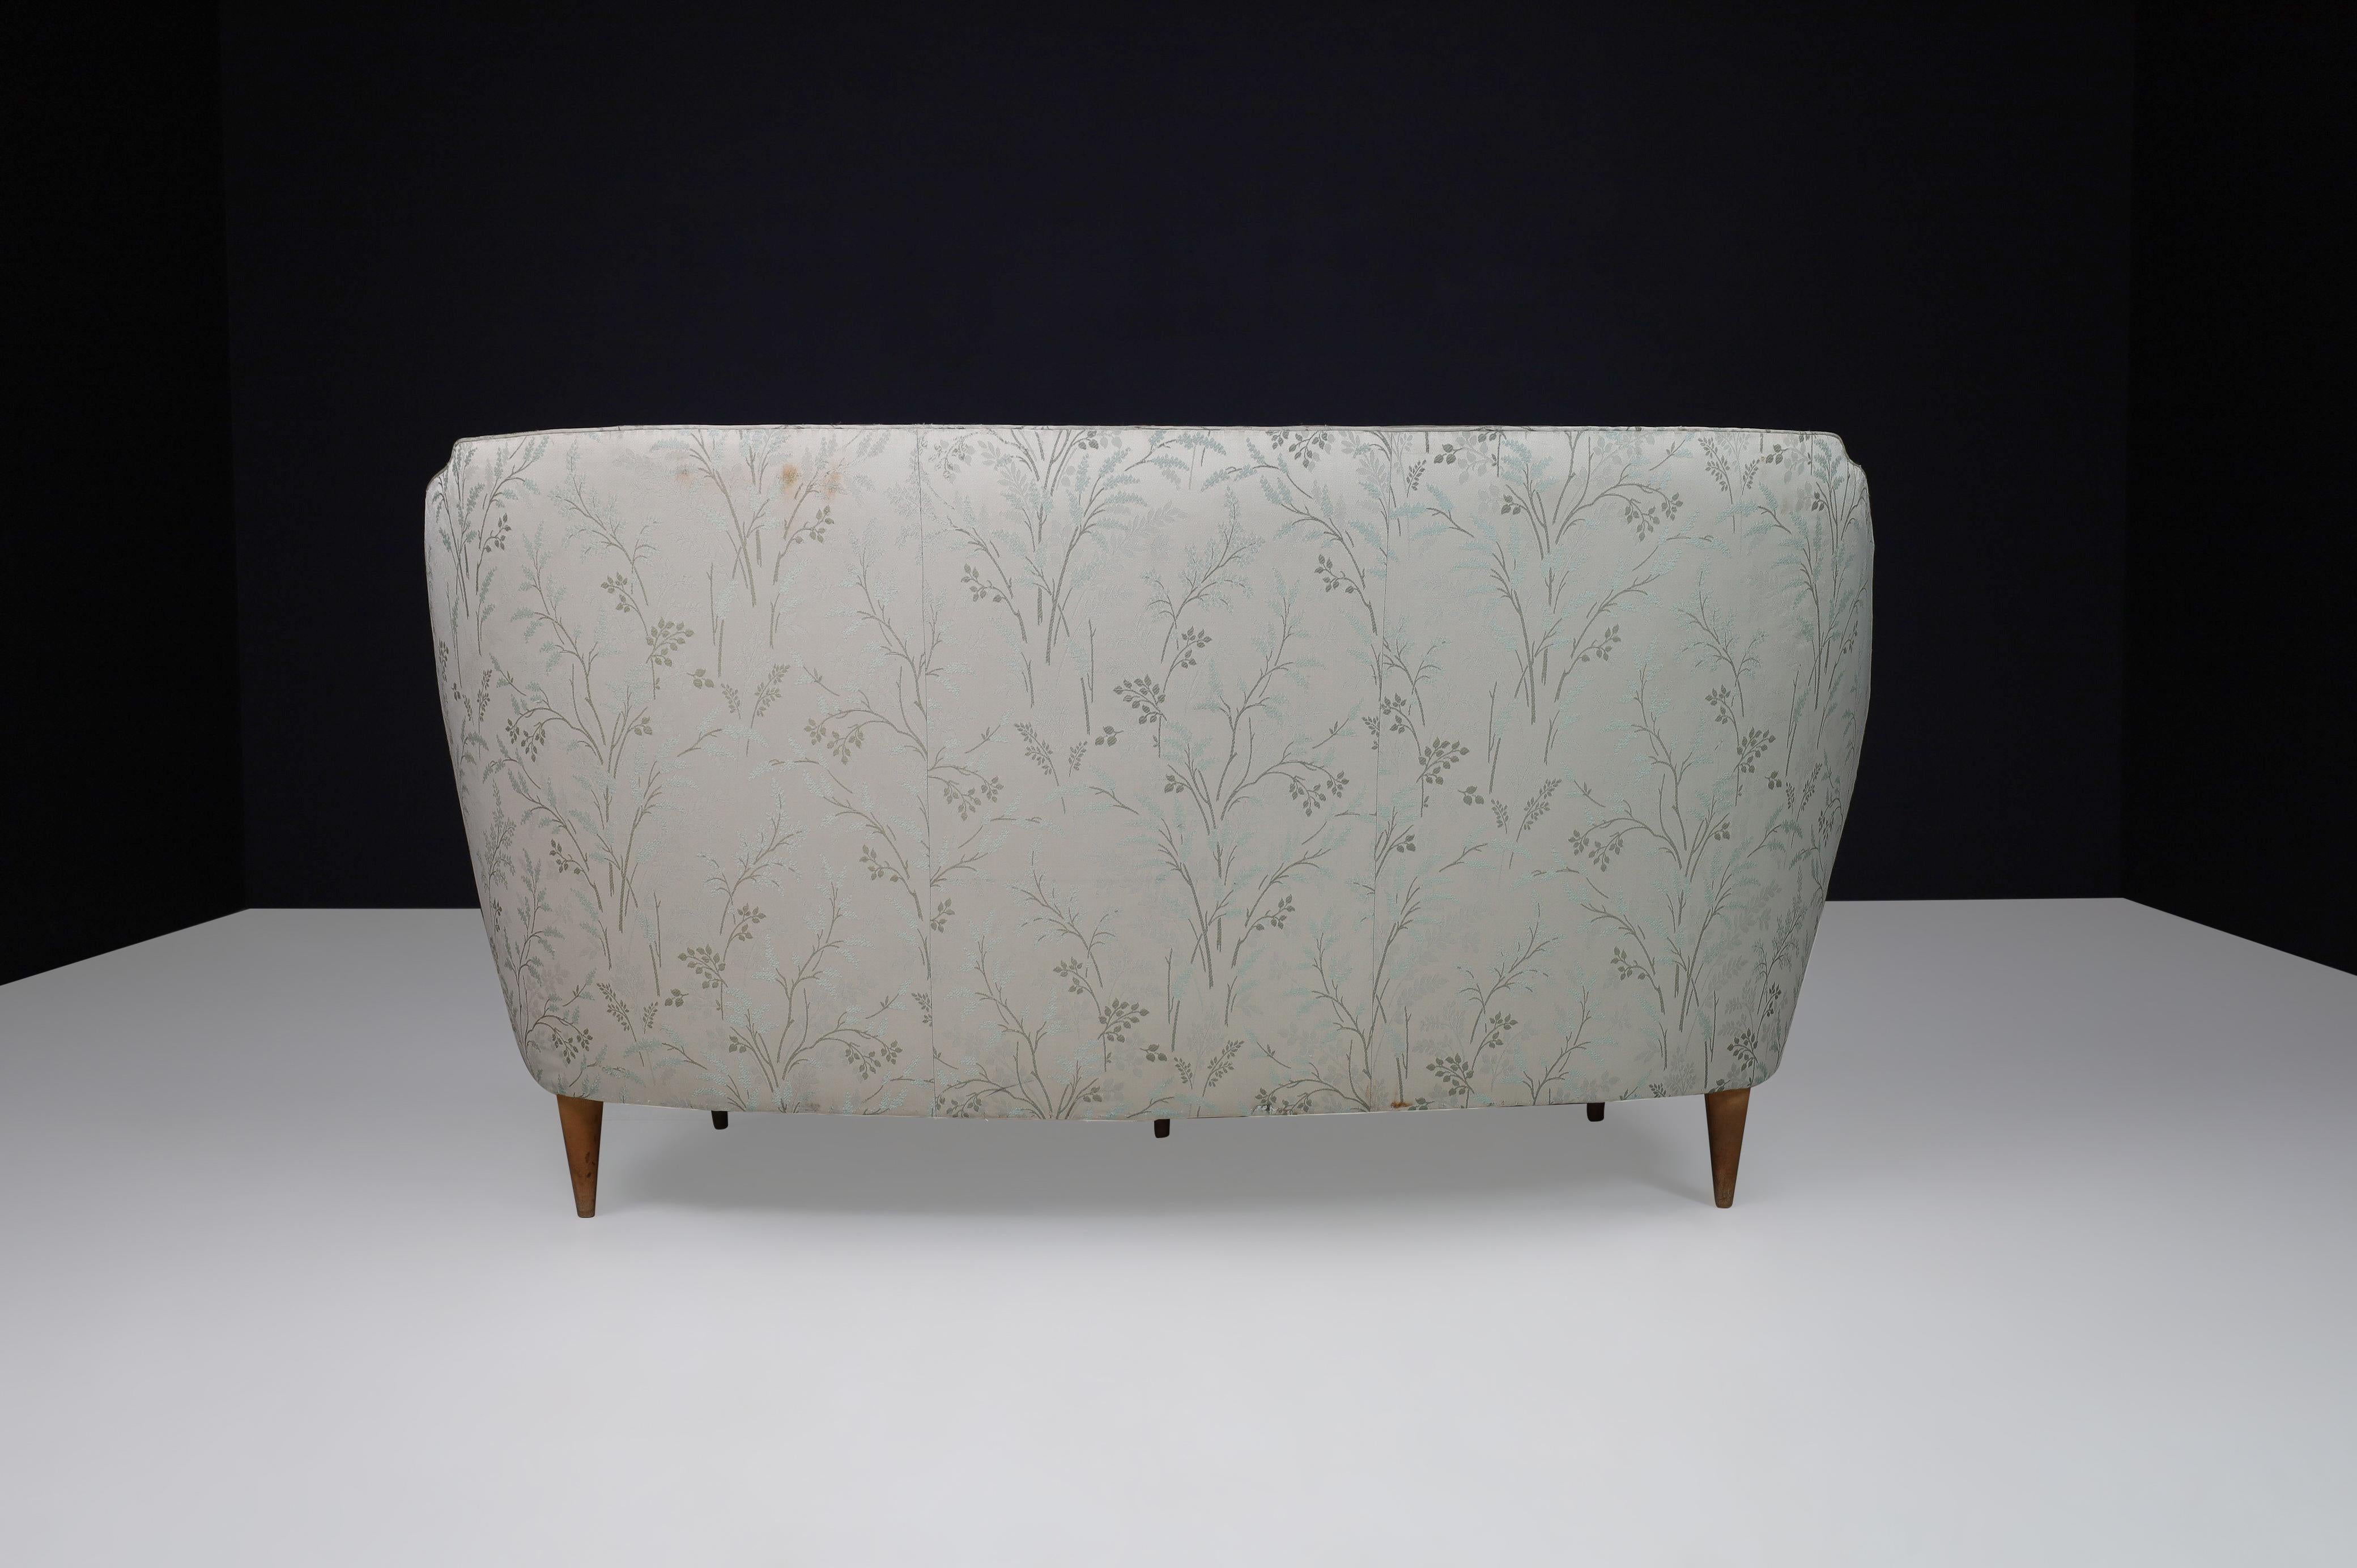 Ico Parisi Sofa in Leaf Motif Fabric and Tapered Wooden Legs, Italy, 1950s For Sale 5